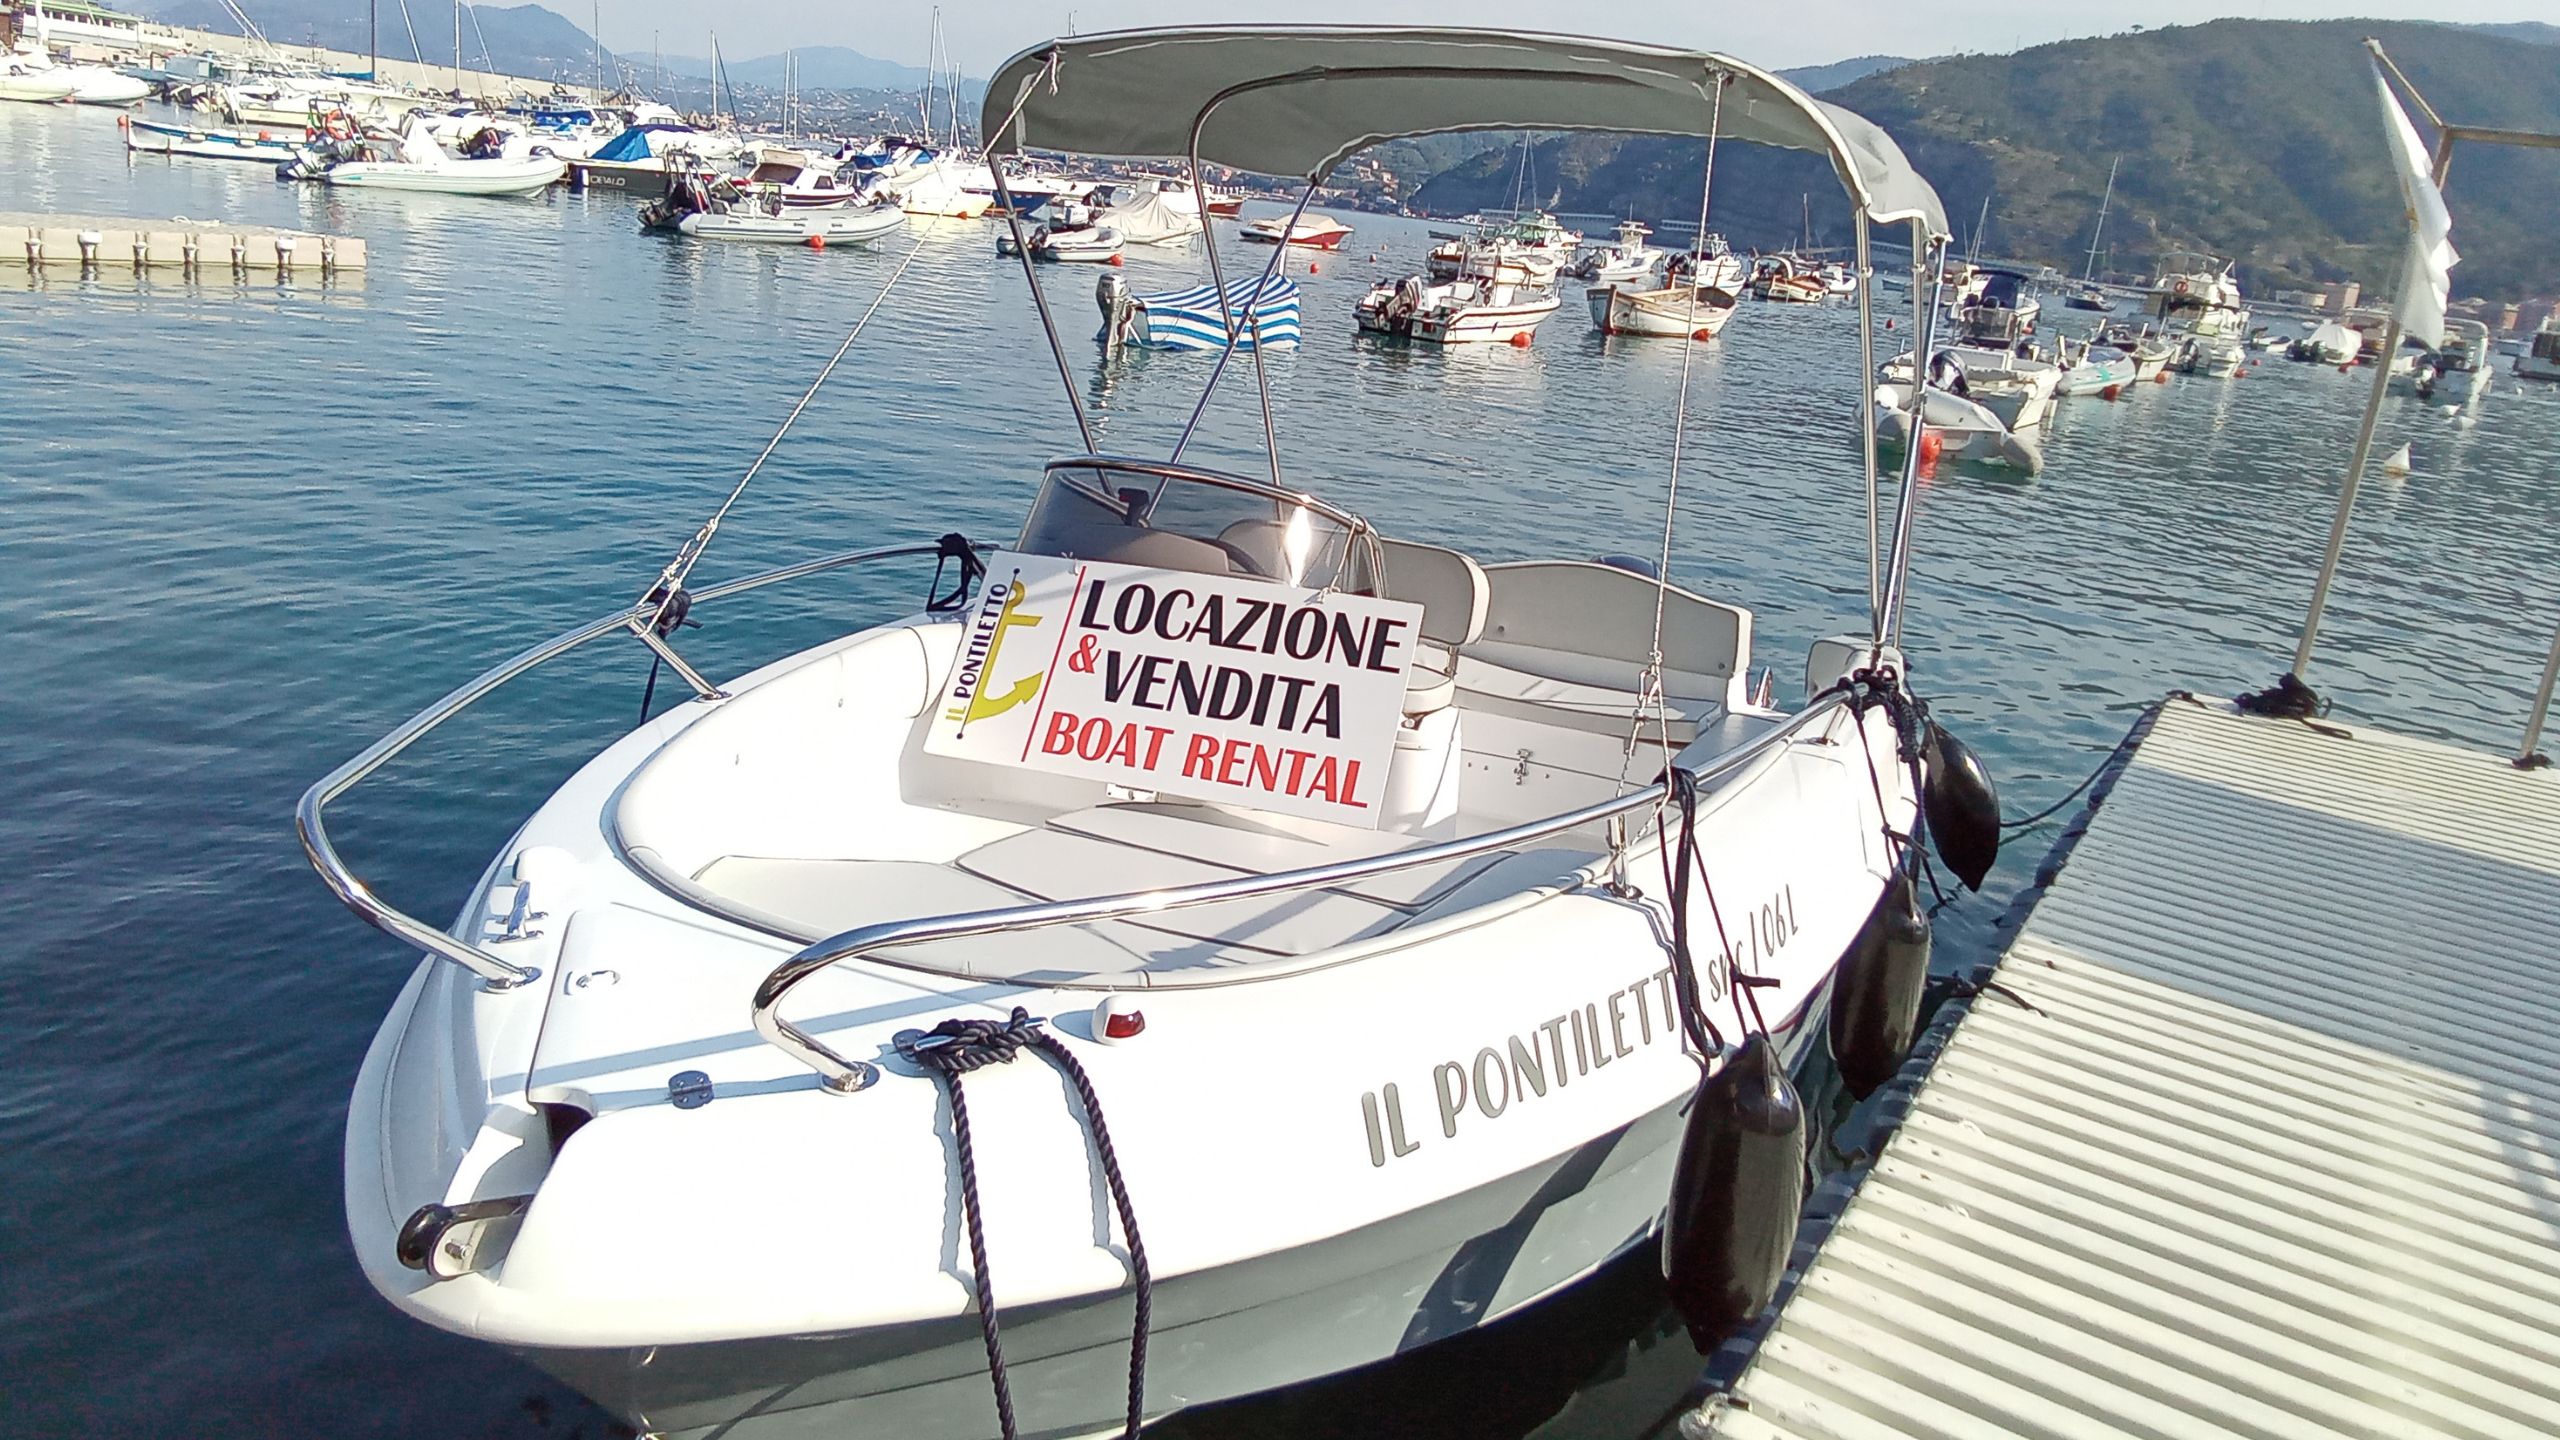 Marinello 18 40hp without a boat license 6mt (Max: 7 People)